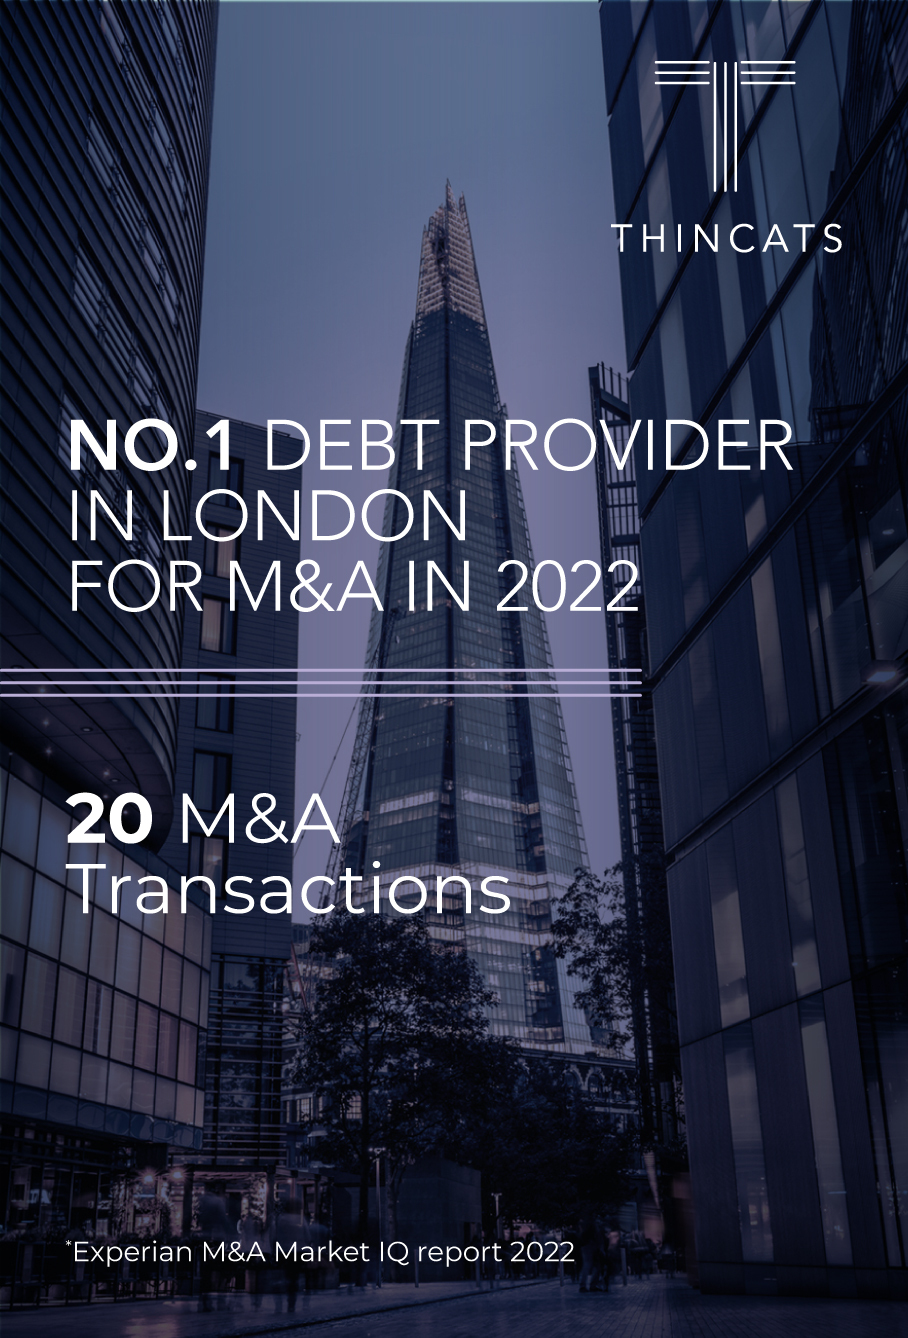 ThinCats ranks top of M&A debt providers in London in 2022